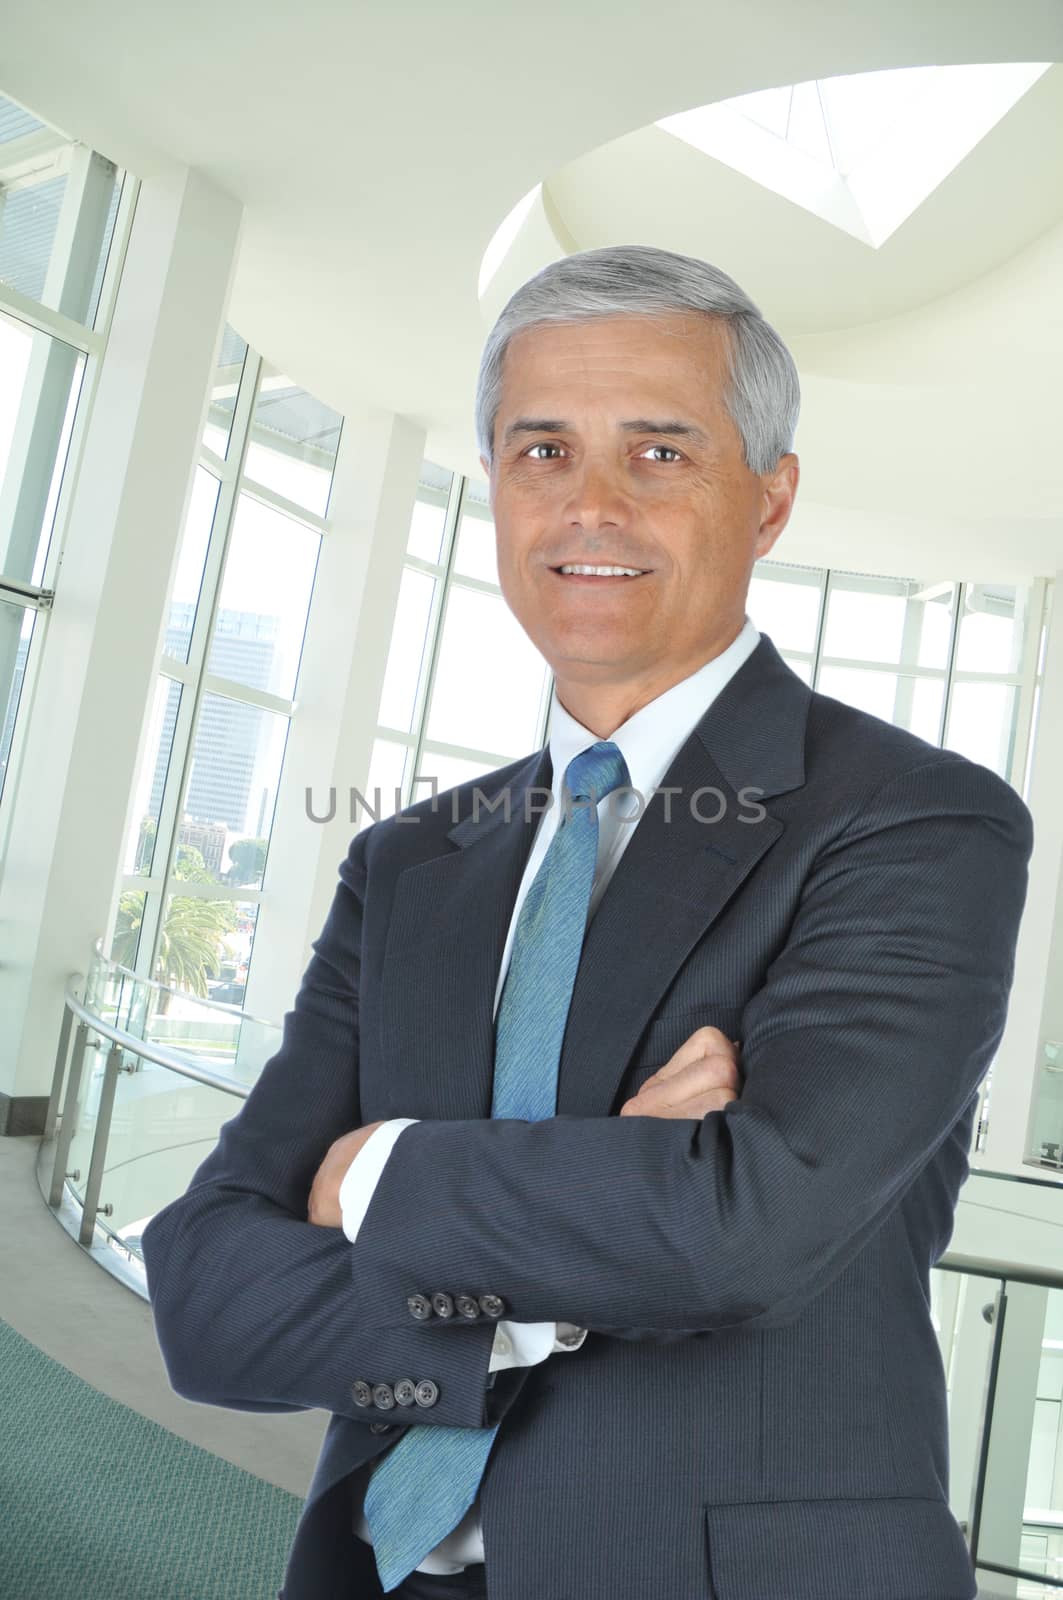 Middle aged Businessman in Lobby of modern Building with His Arms Folded, Vertical Format.